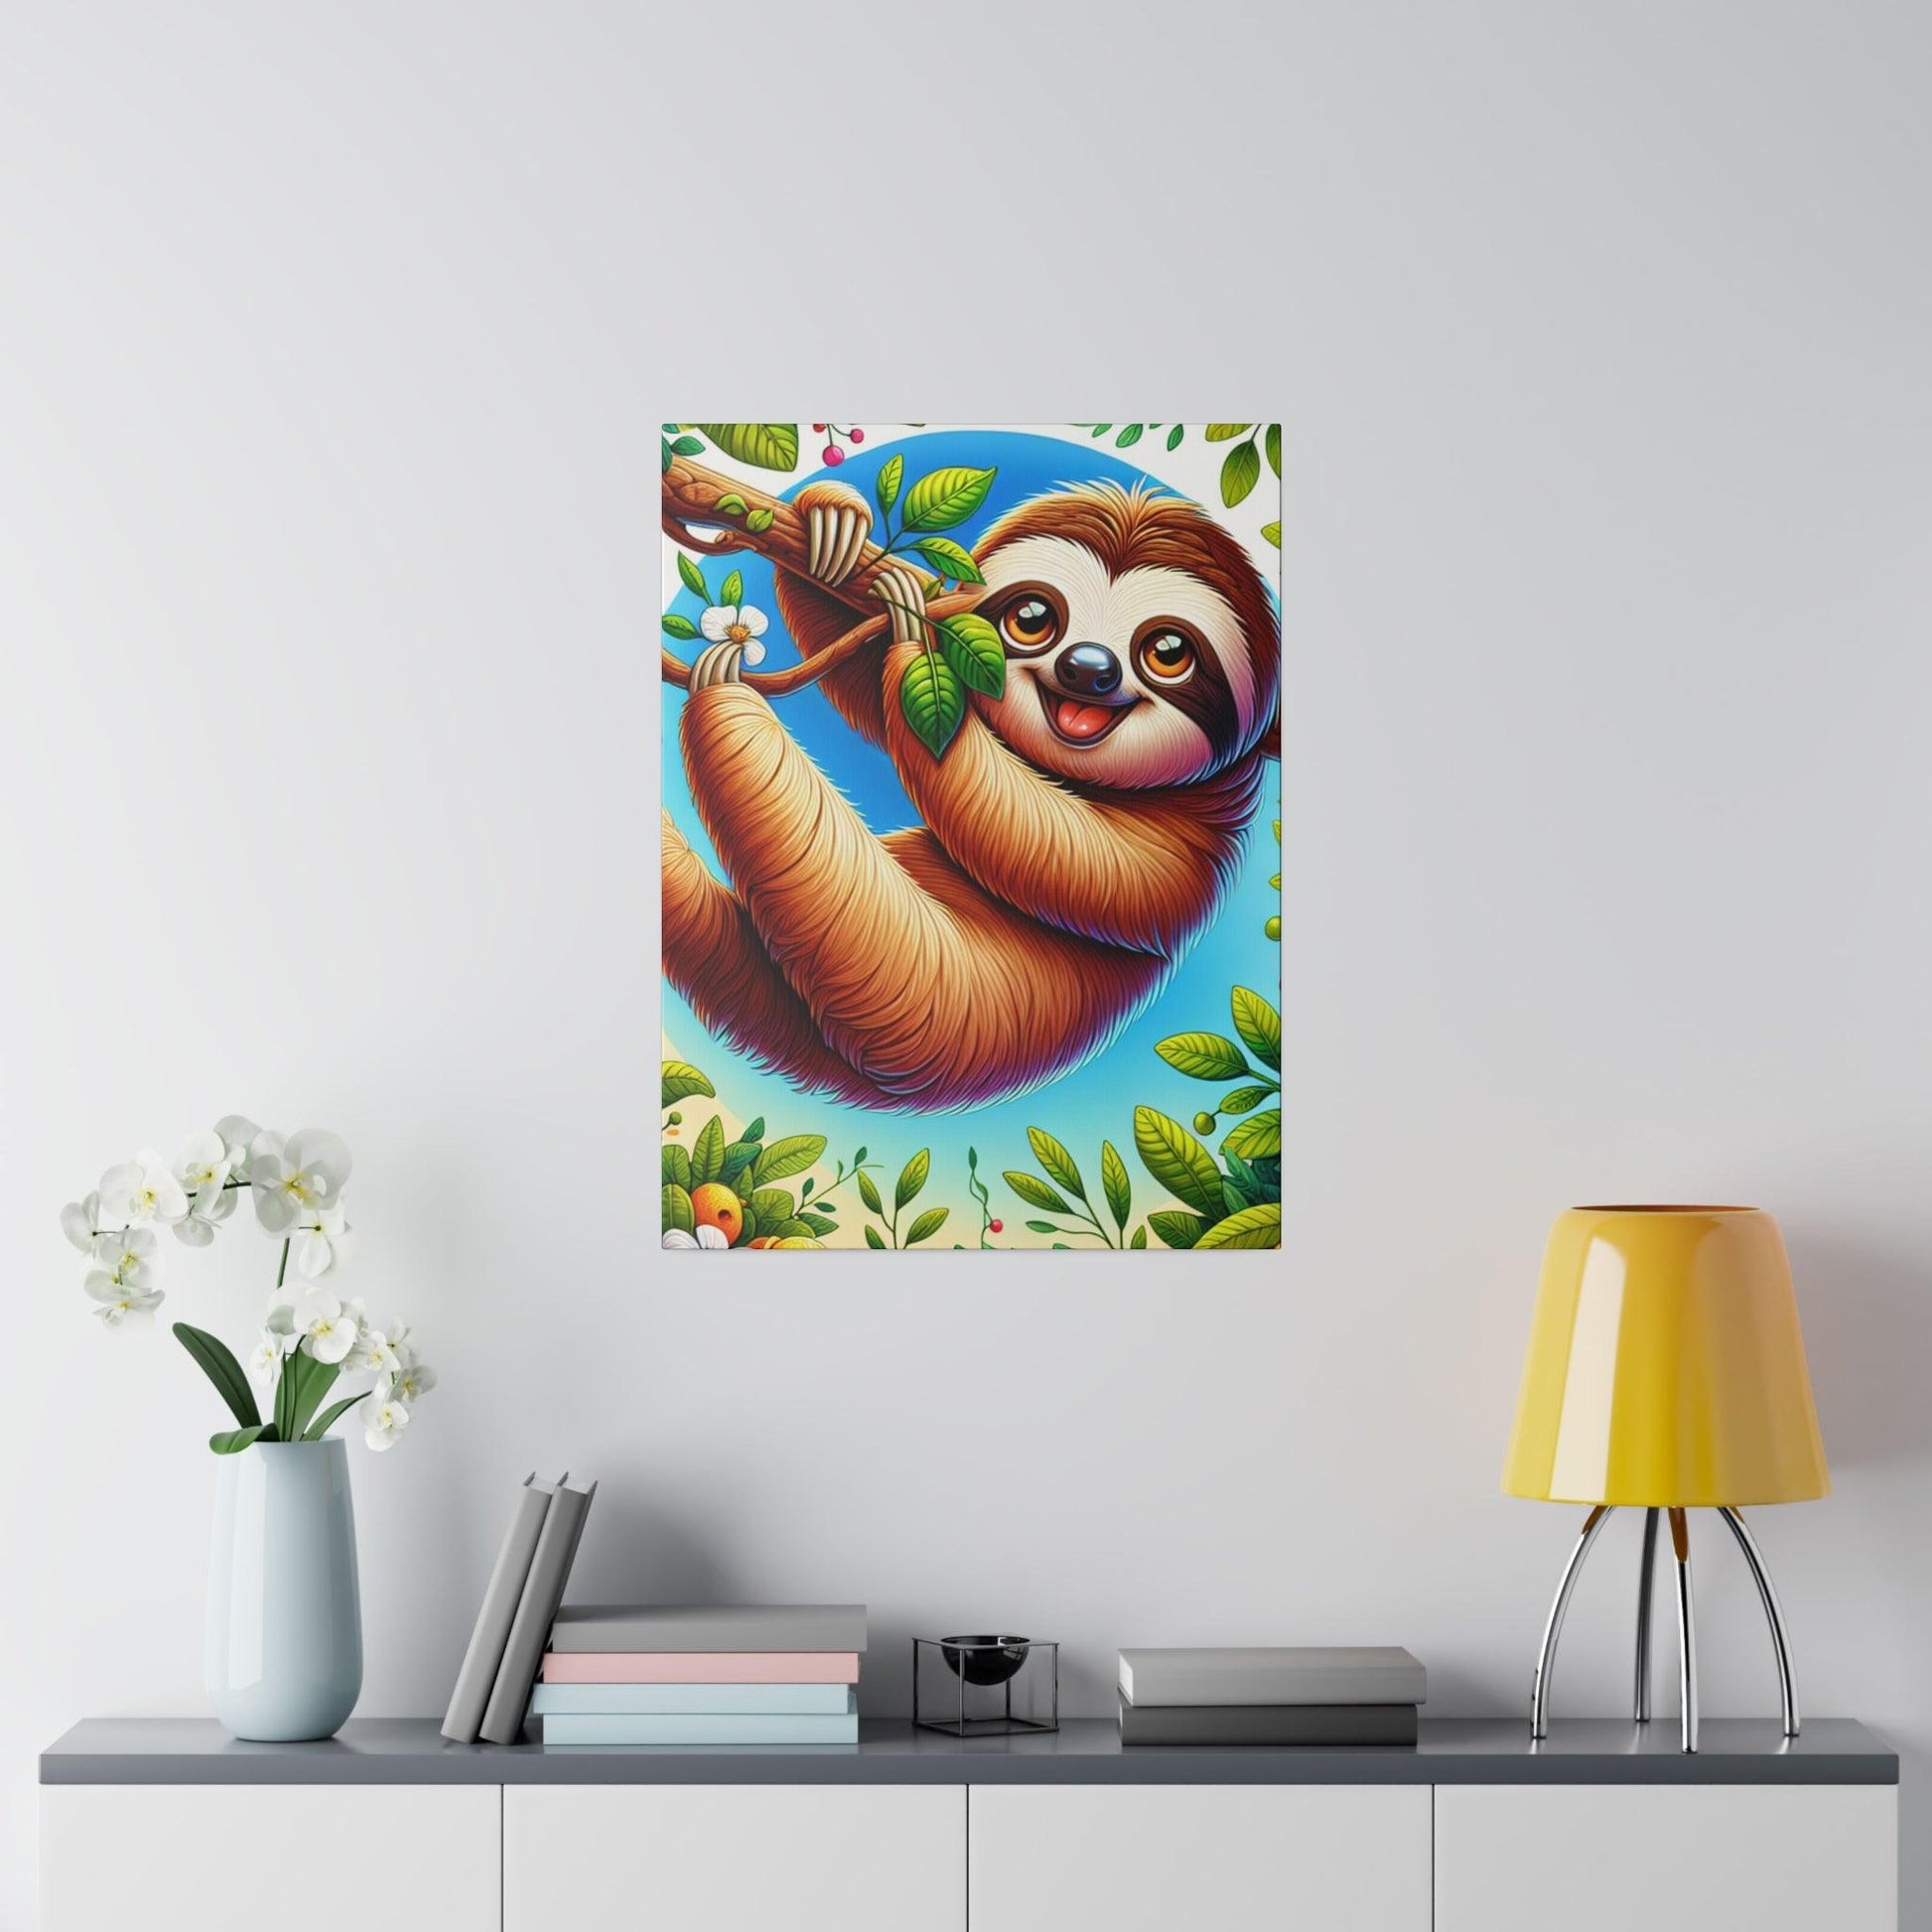 "Slothful Serenity: Blissful Canvas Wall Art" - The Alice Gallery